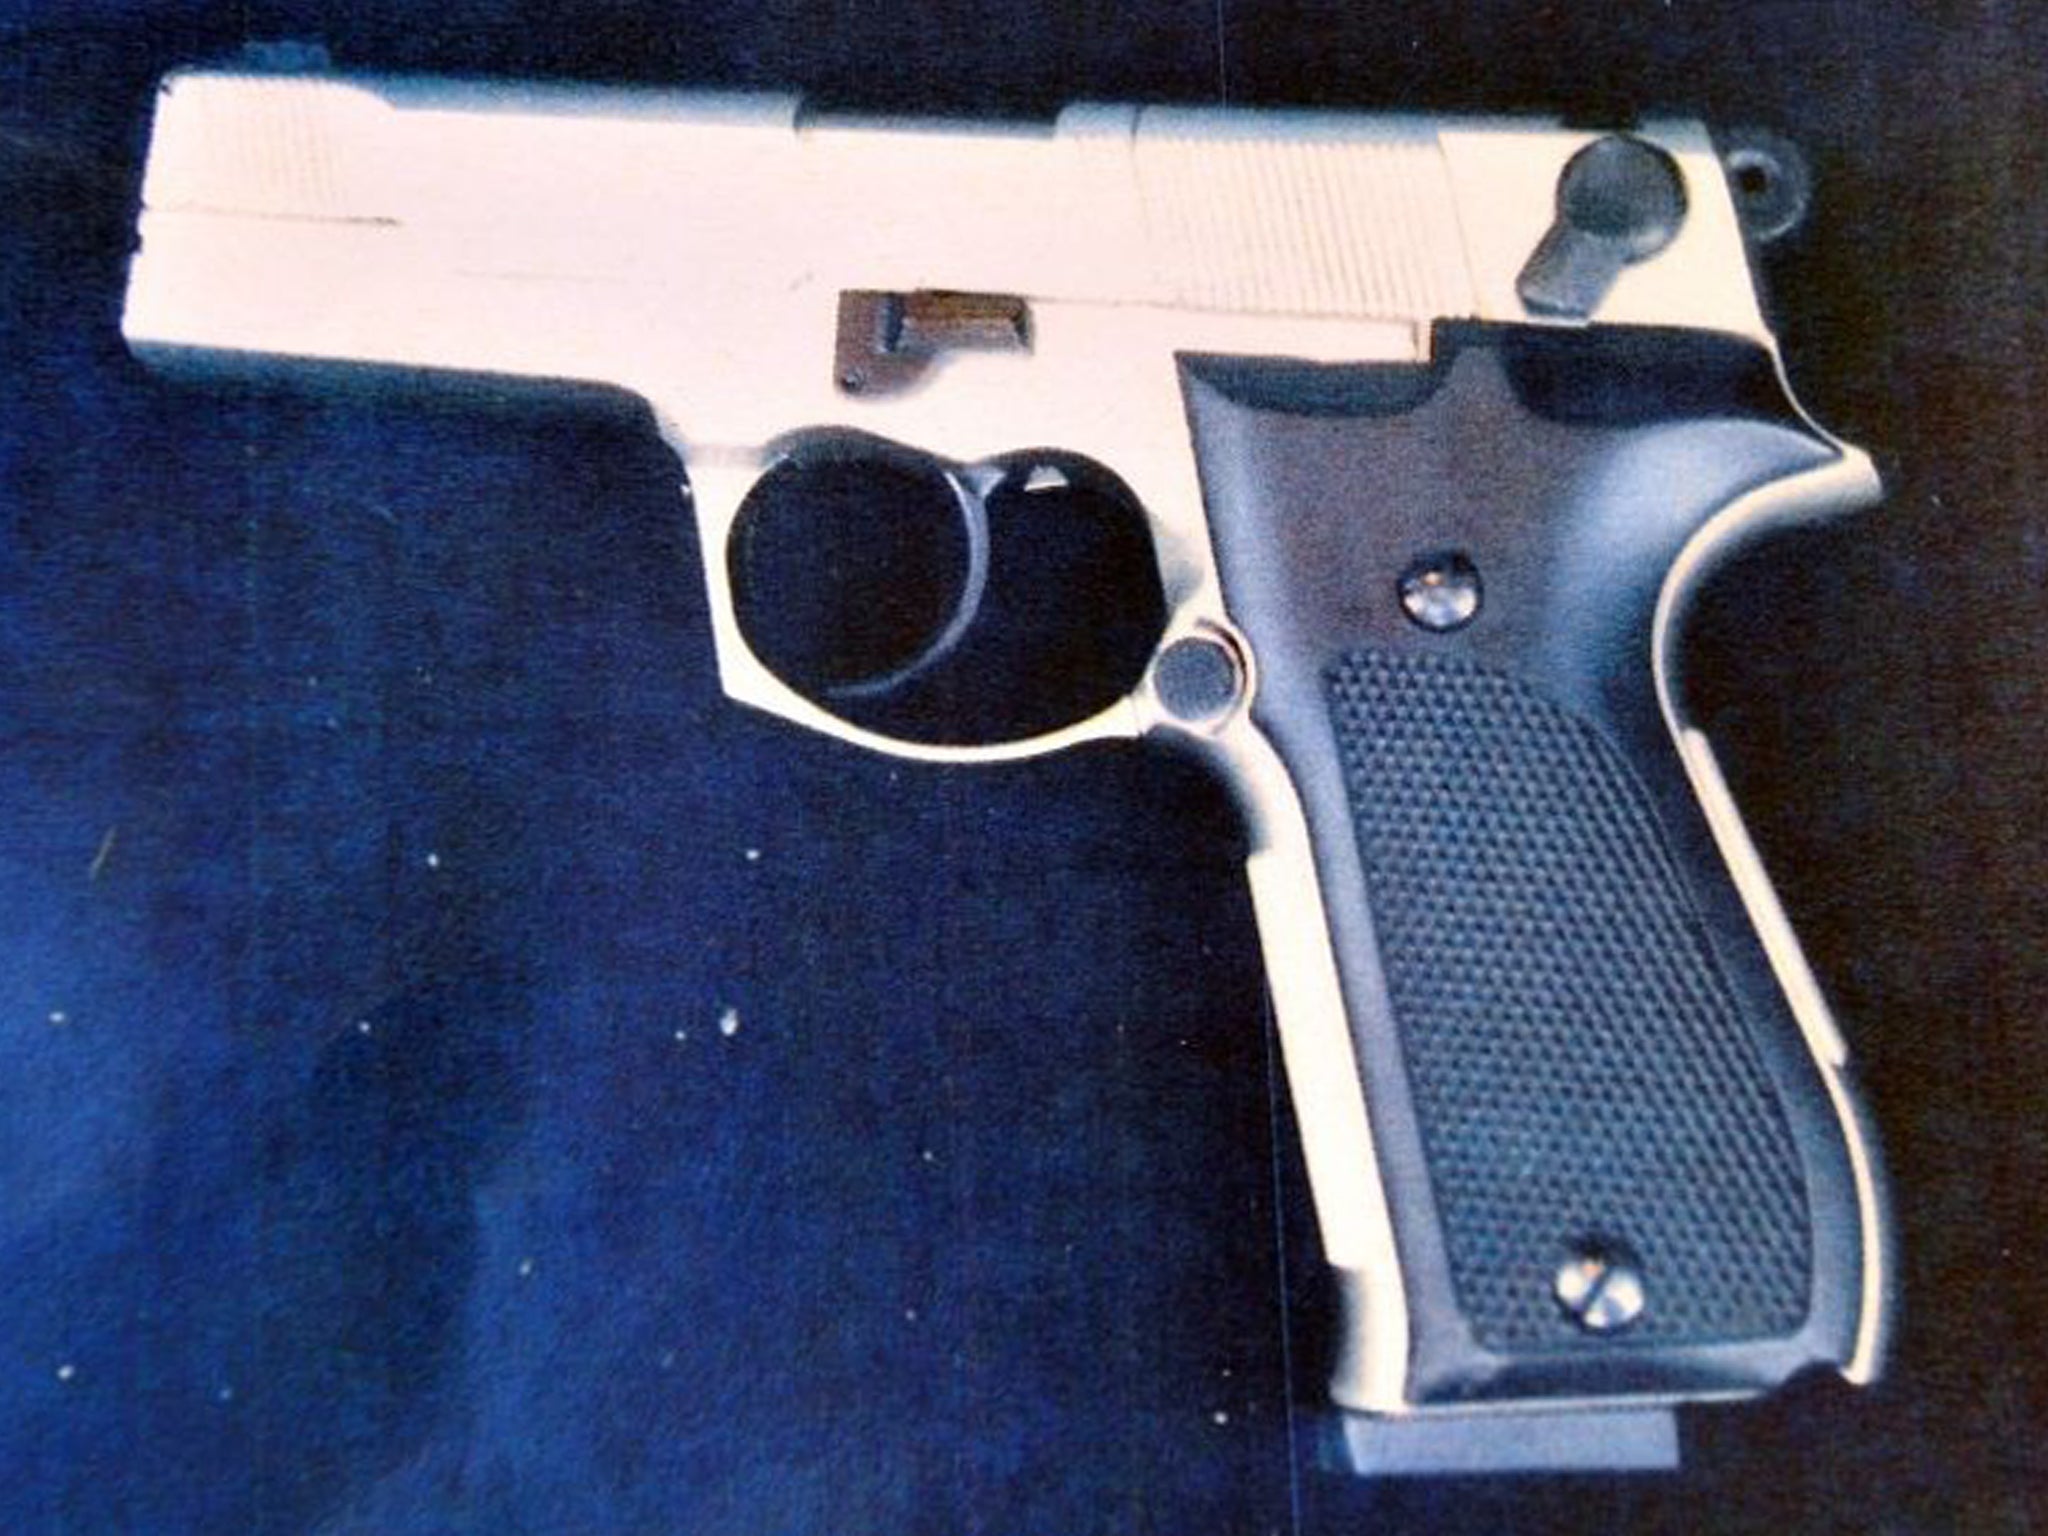 Avon and Somerset Police handout photo of the 0.177 air pistol which student Yang Li, 26, had when he went to meet his professor at the University of Bath, where he offered him £5,000 in cash in a bid to pass his degree